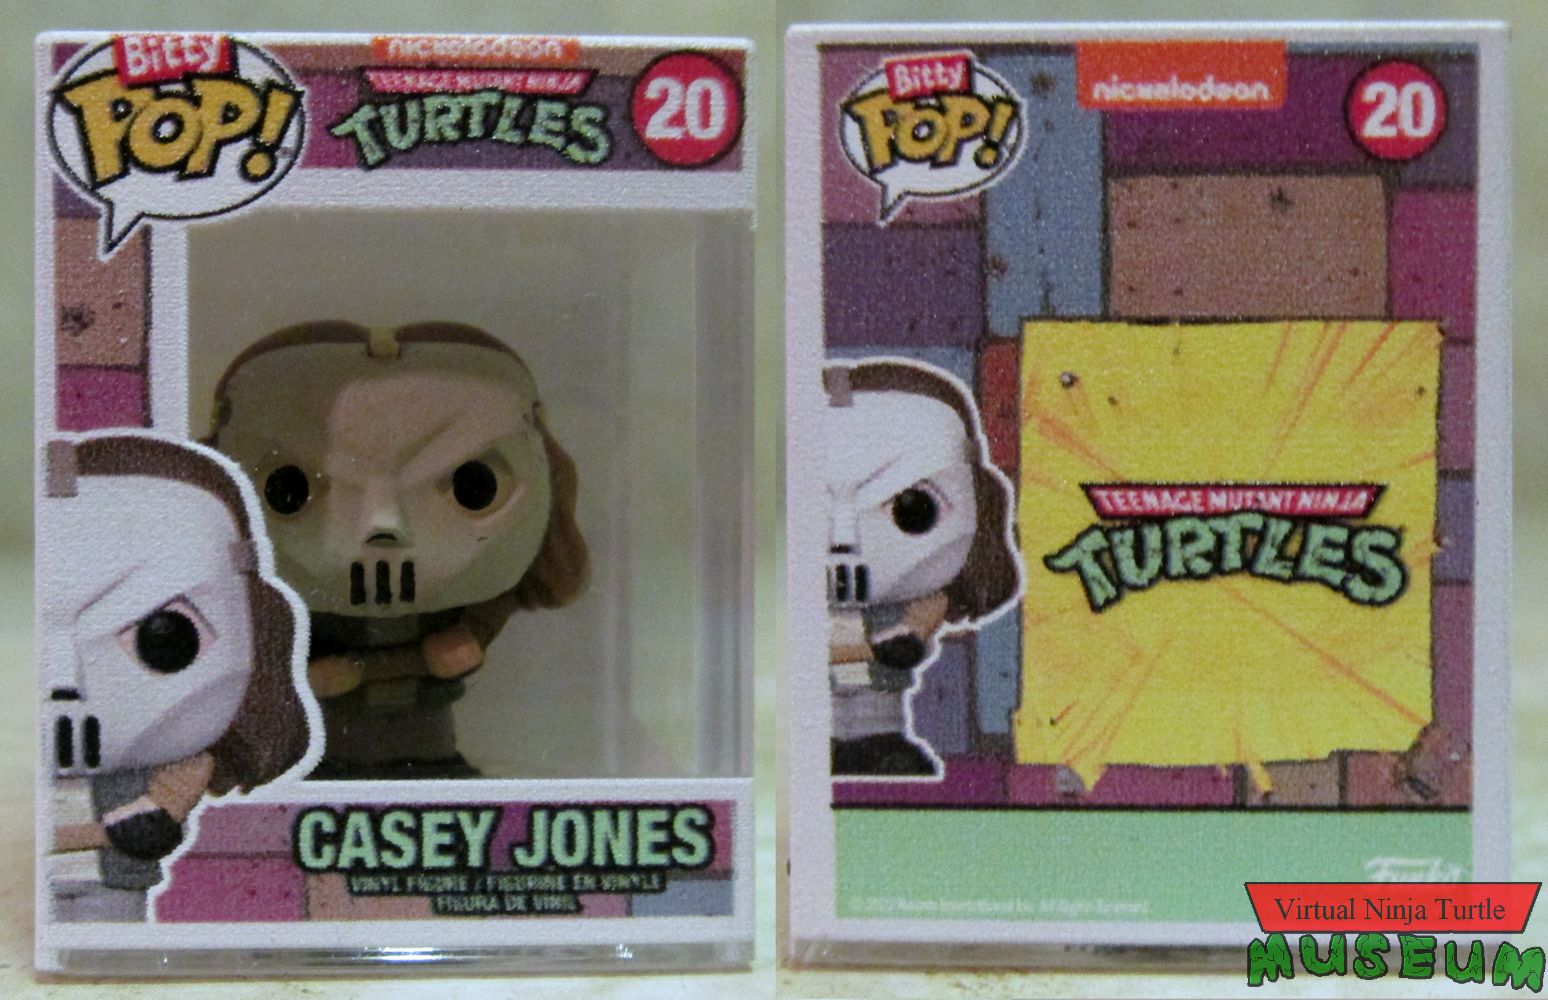 Casey Jones in case front and back